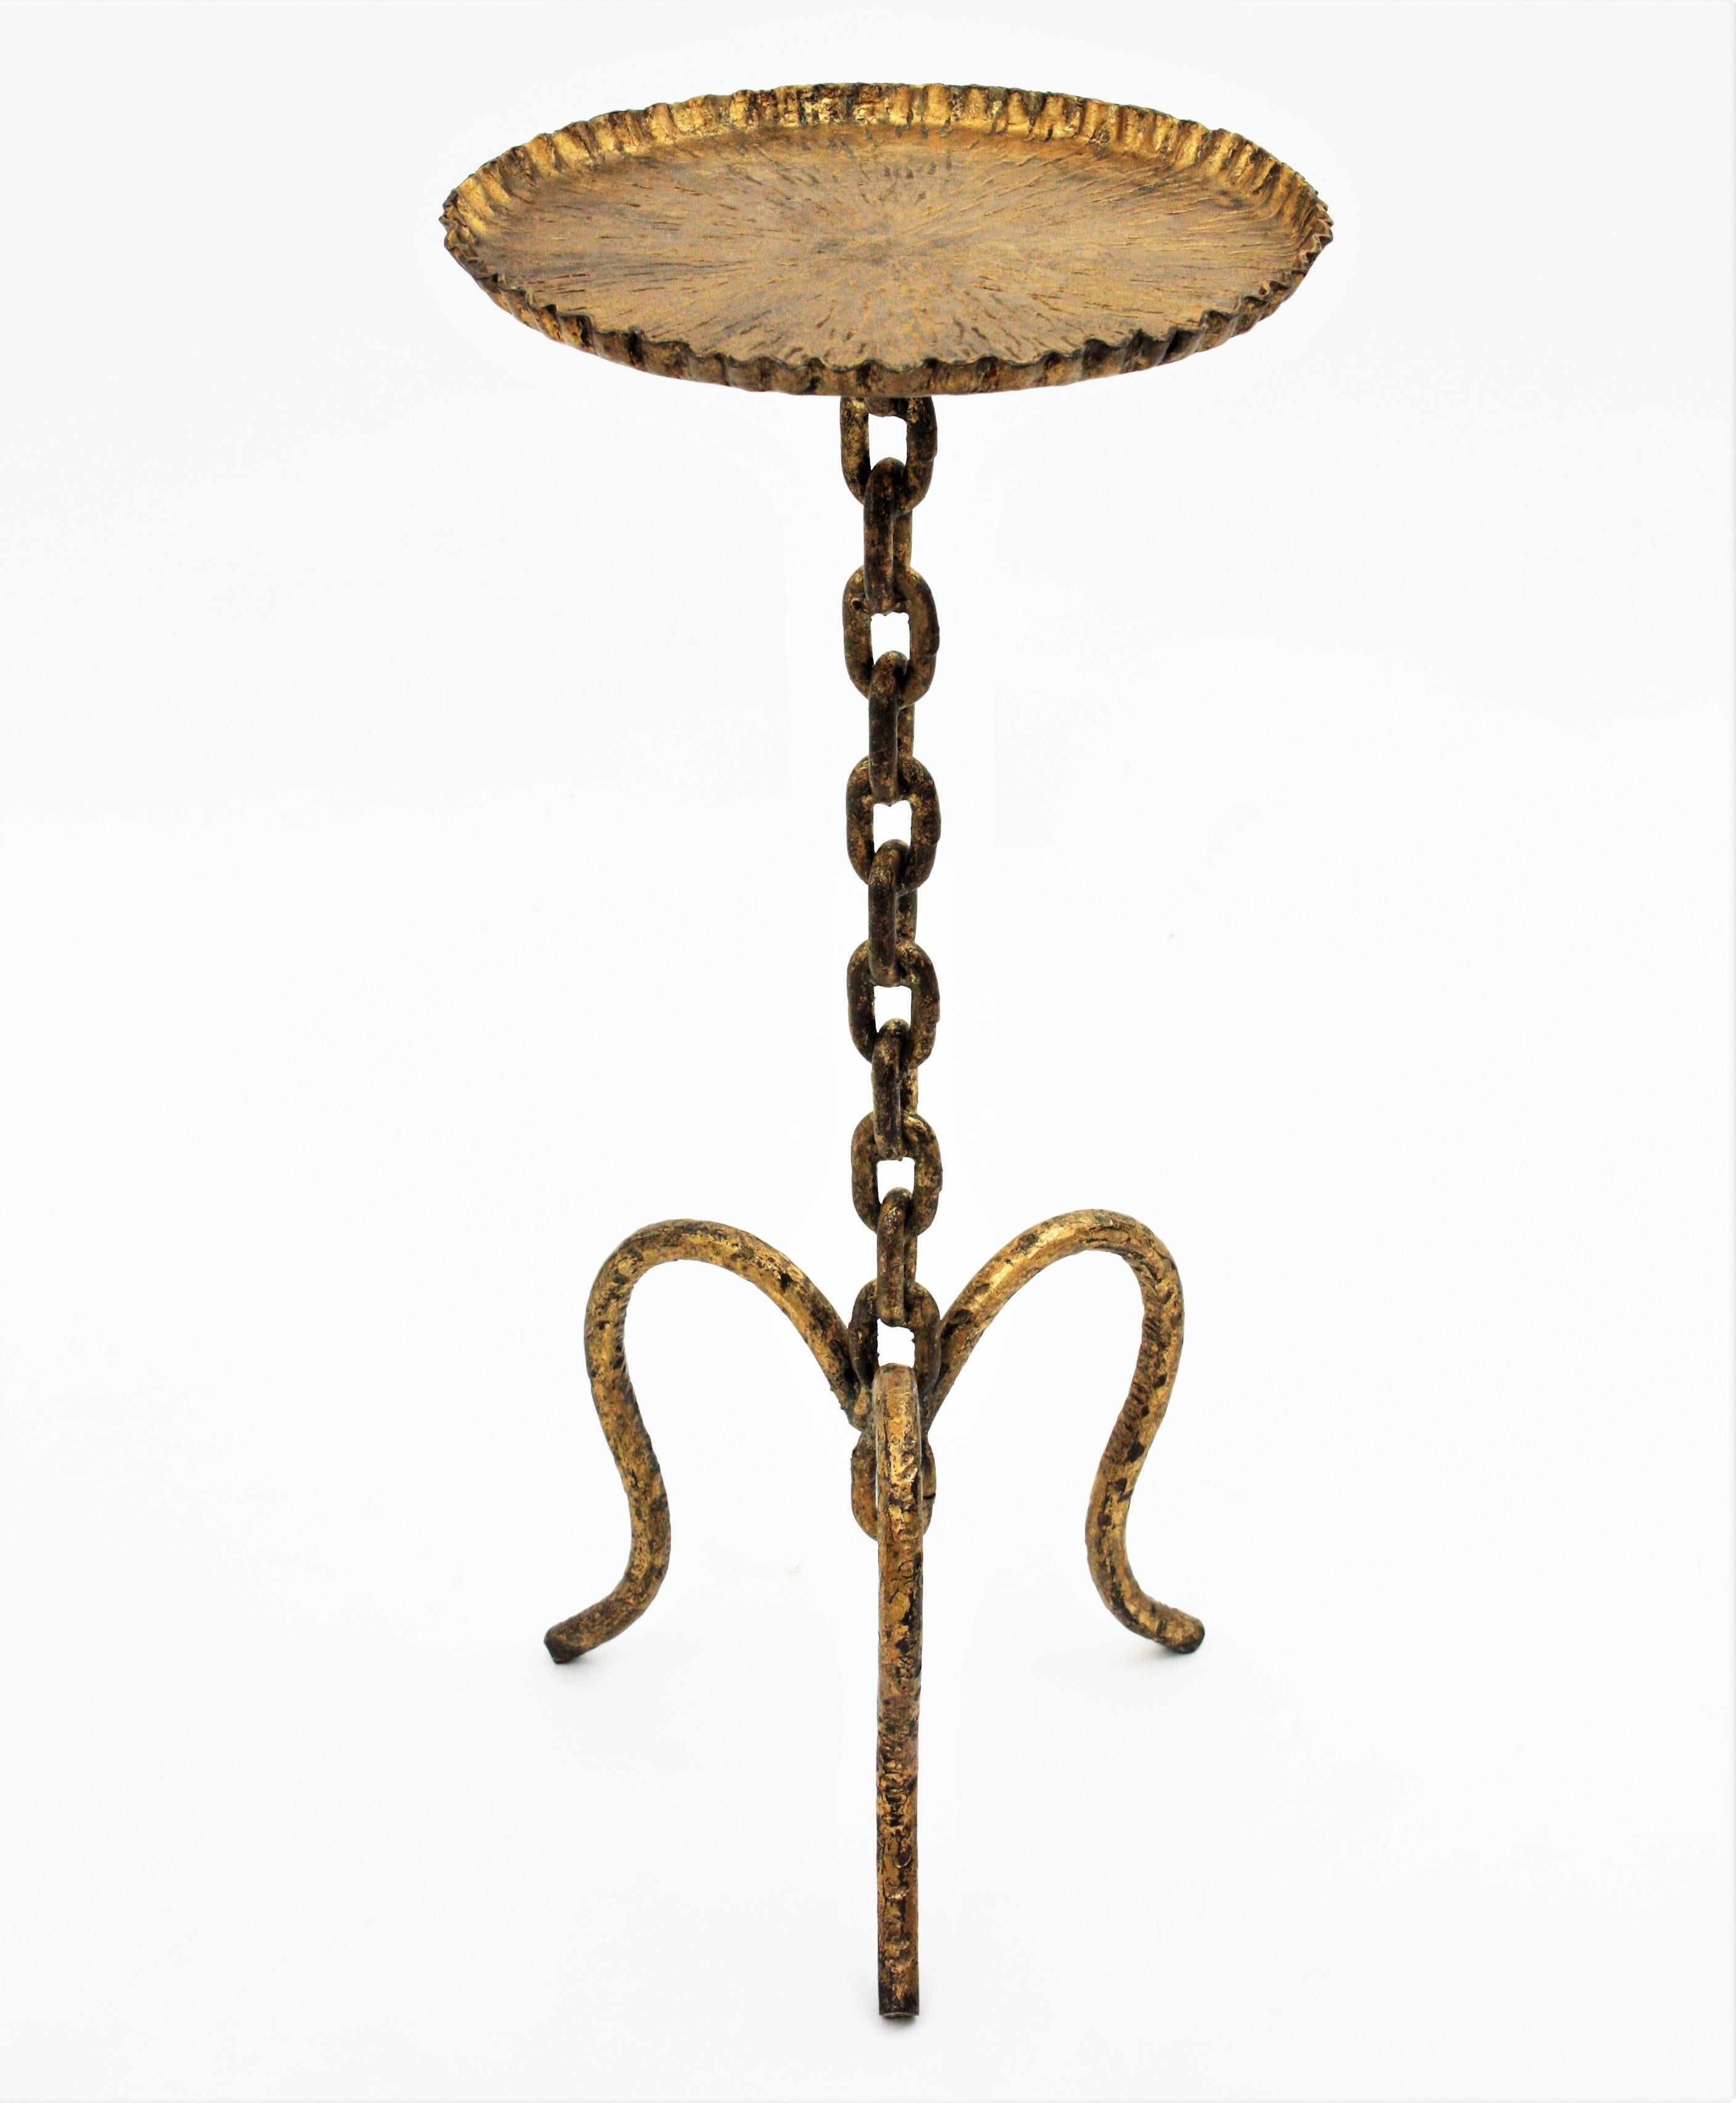 Spanish gilt wrought iron drink table Guéridon / side table with chain link motif, 1930s-1940s.
Beautiful hand forged iron occasional table with chain link stem and wavy edged top standing on a tripod base.
This Guéridon pedestal table has an